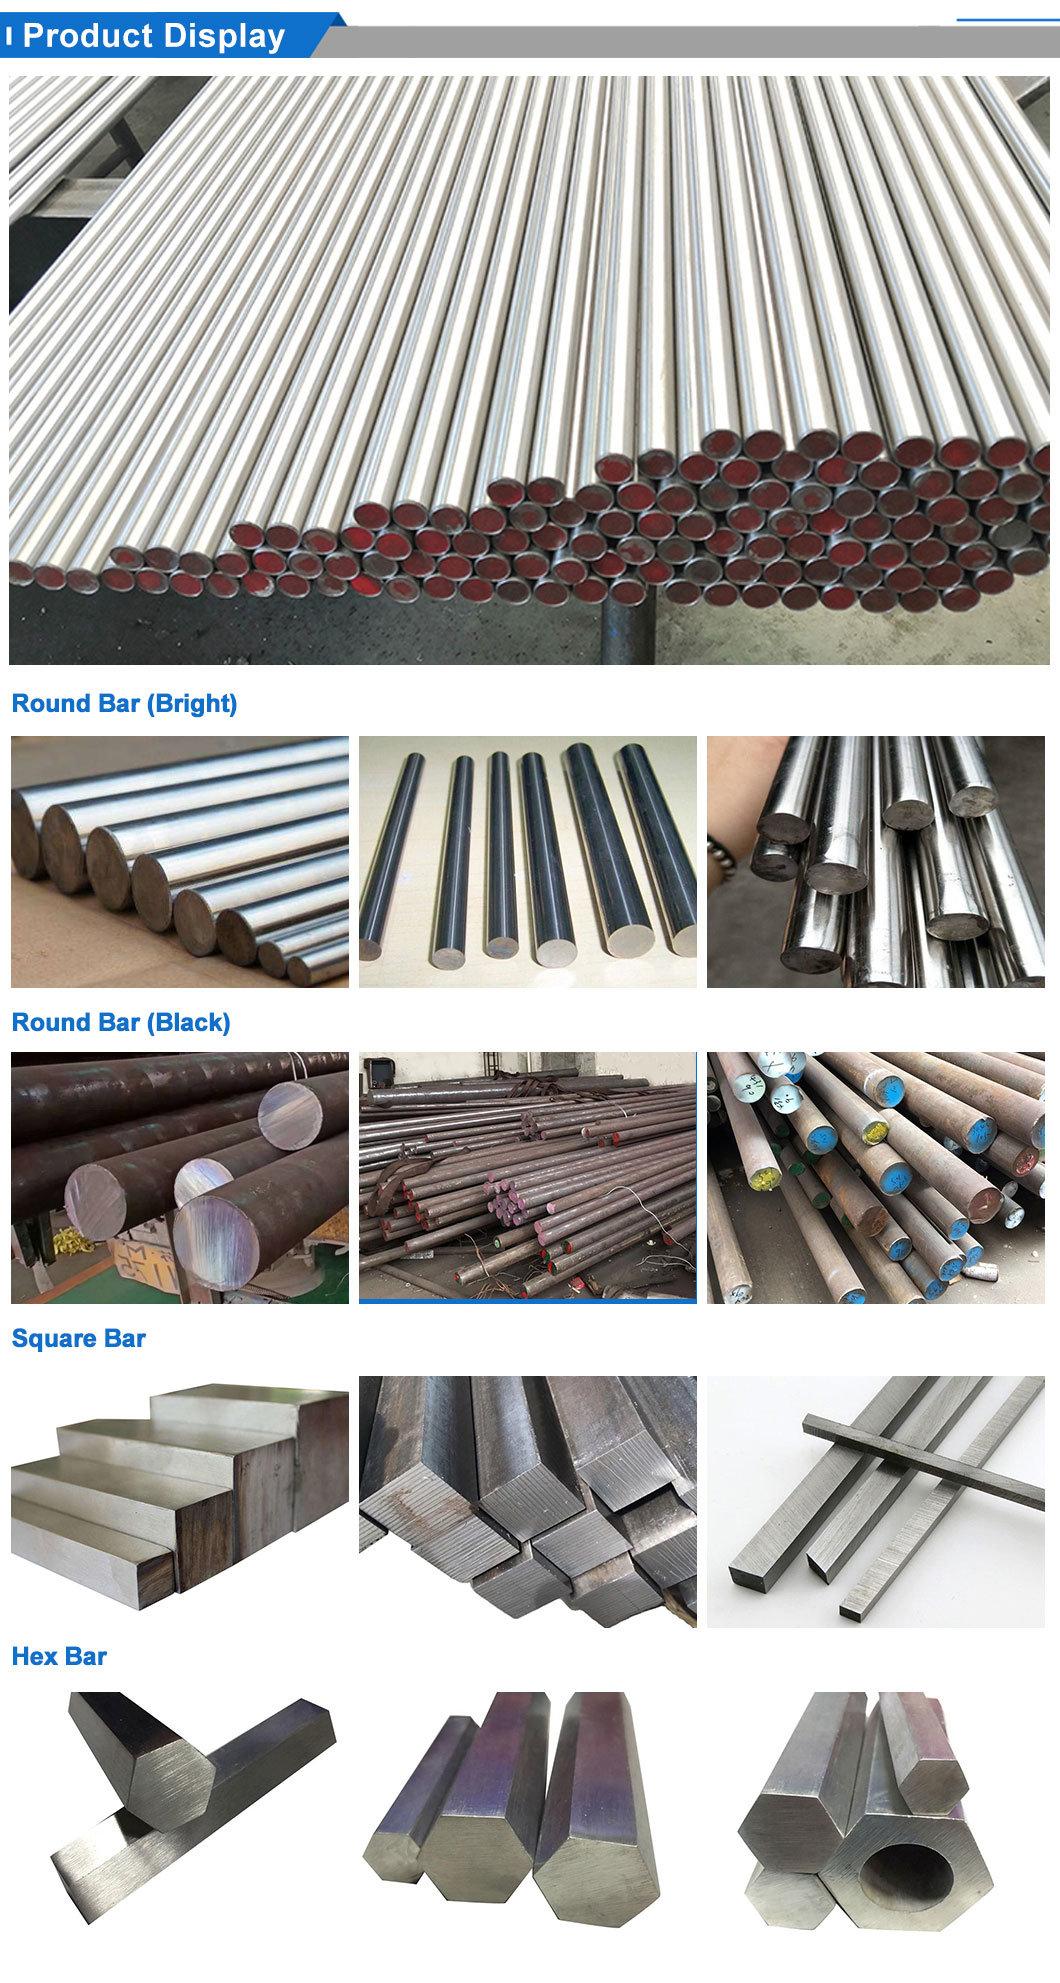 SUS 402 Building Material Stainless Steel Round Rod